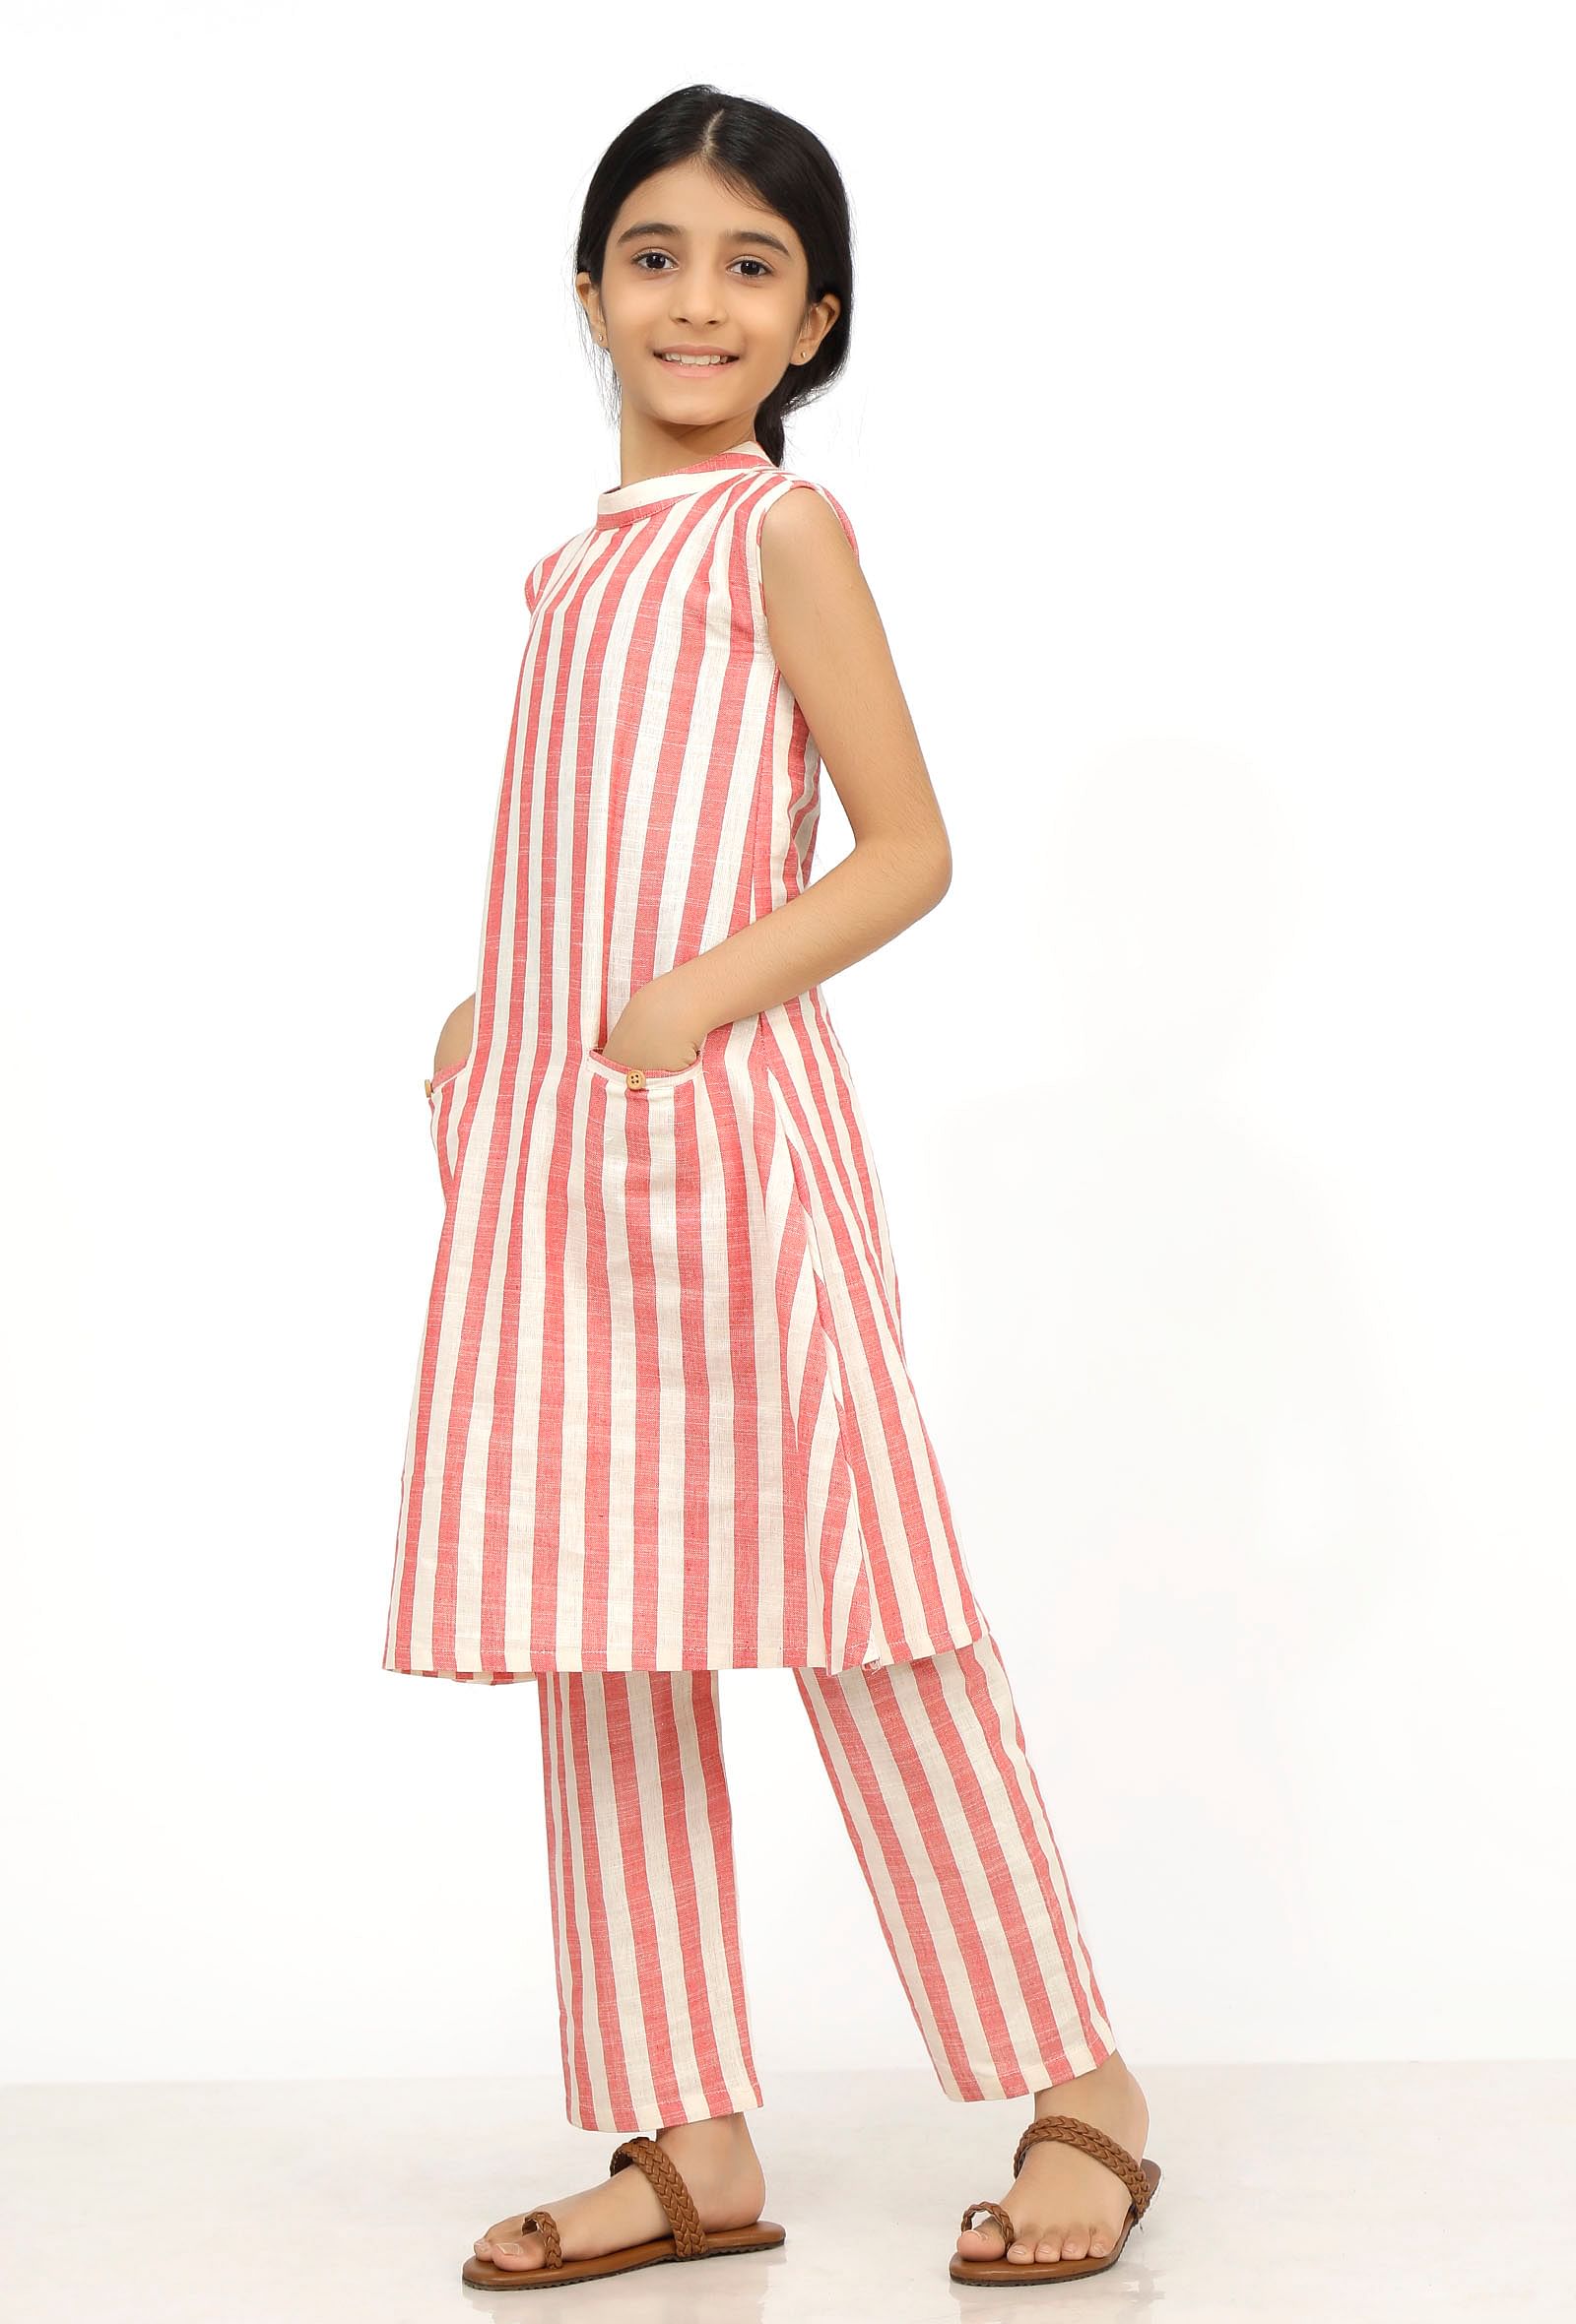 Set of 2: Scarlet Red Stripes Cotton Kurti with Pants